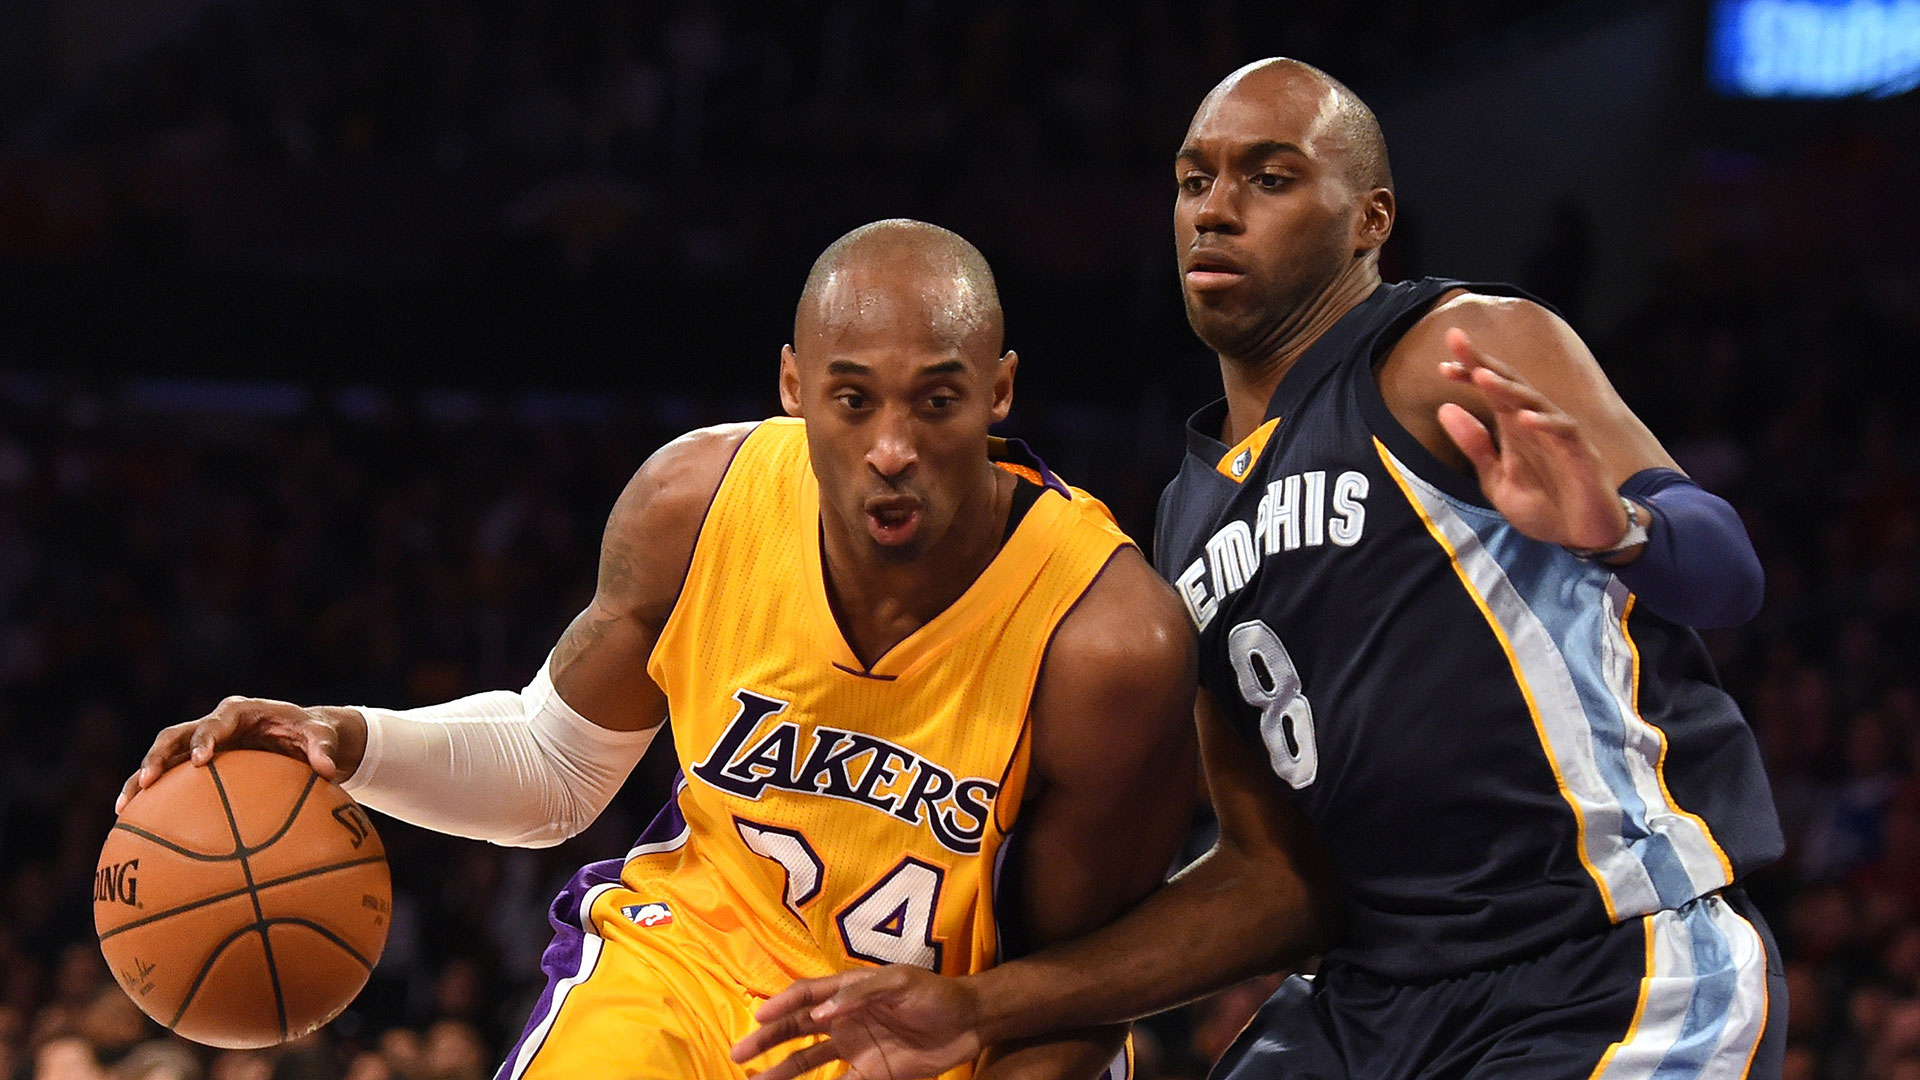 Make your shots mane with Quincy Pondexter